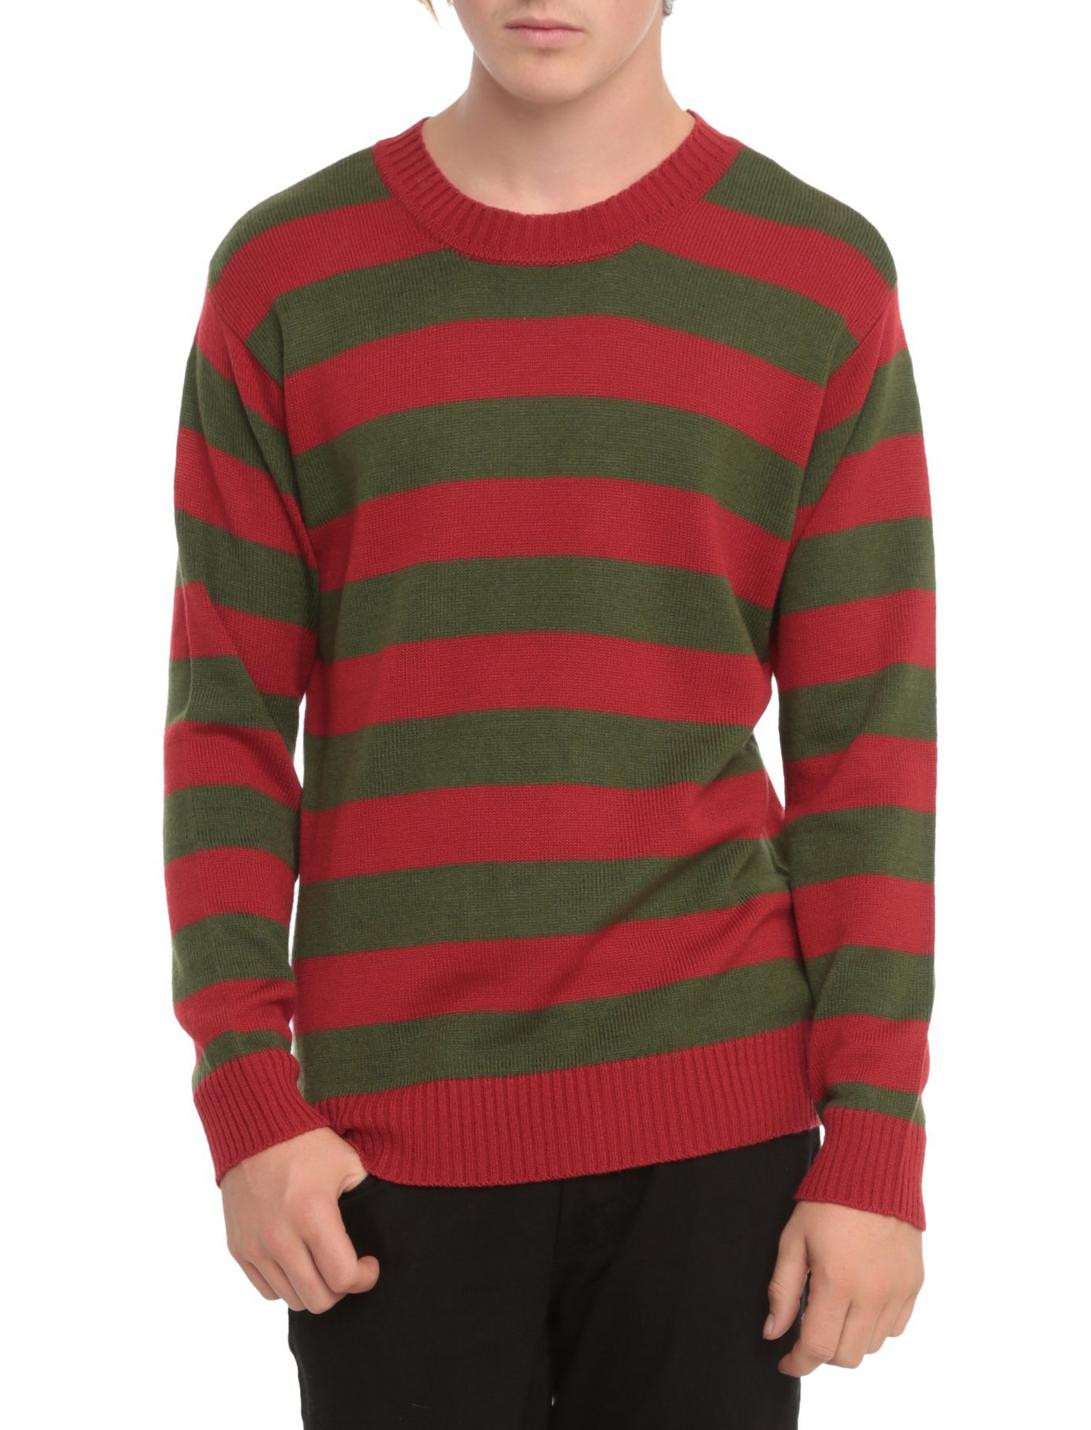 Horror Red & Green Stripe Sweater, , hi-res